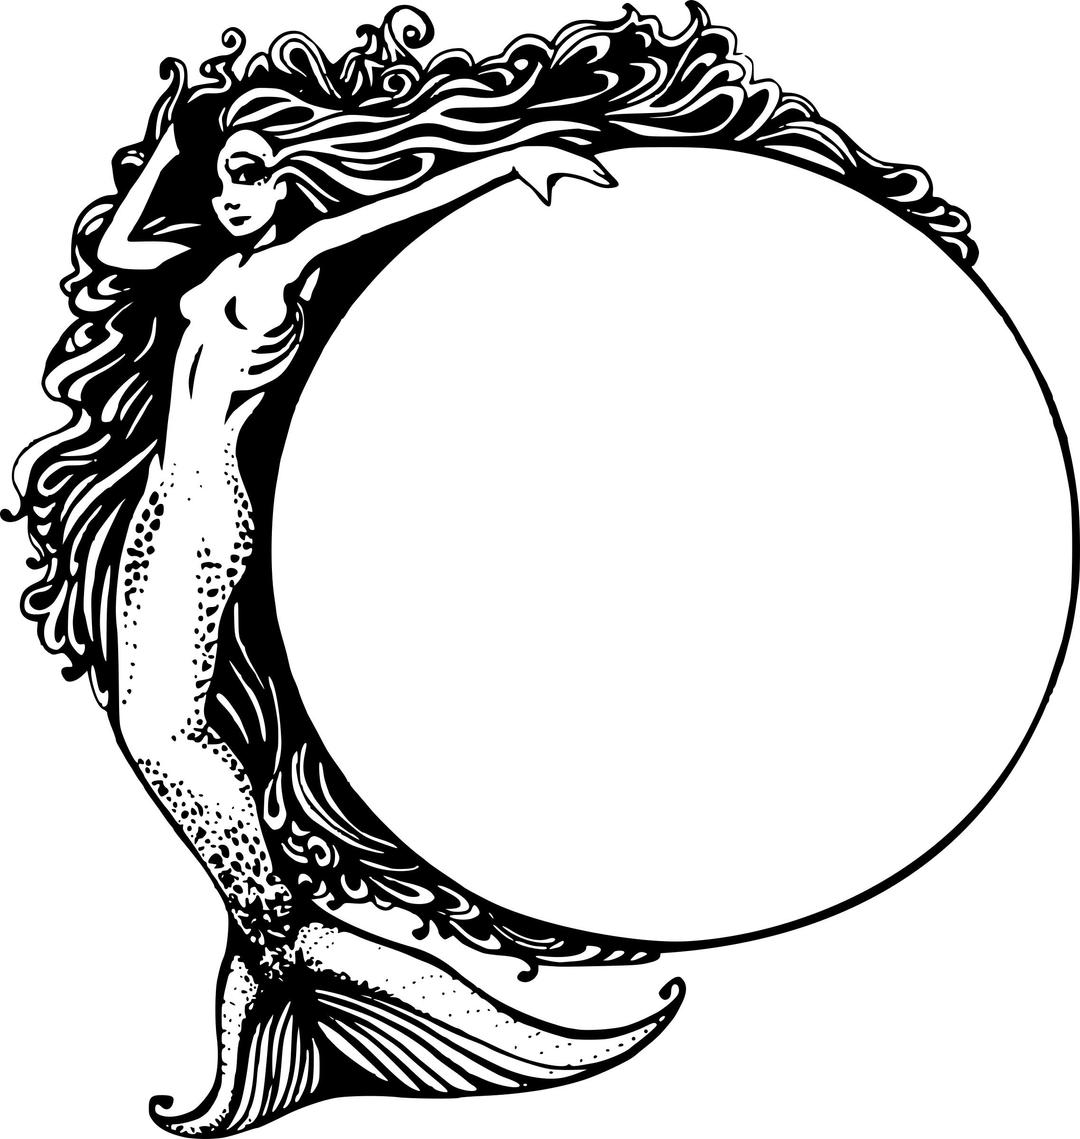 Mermaid with a circle png transparent